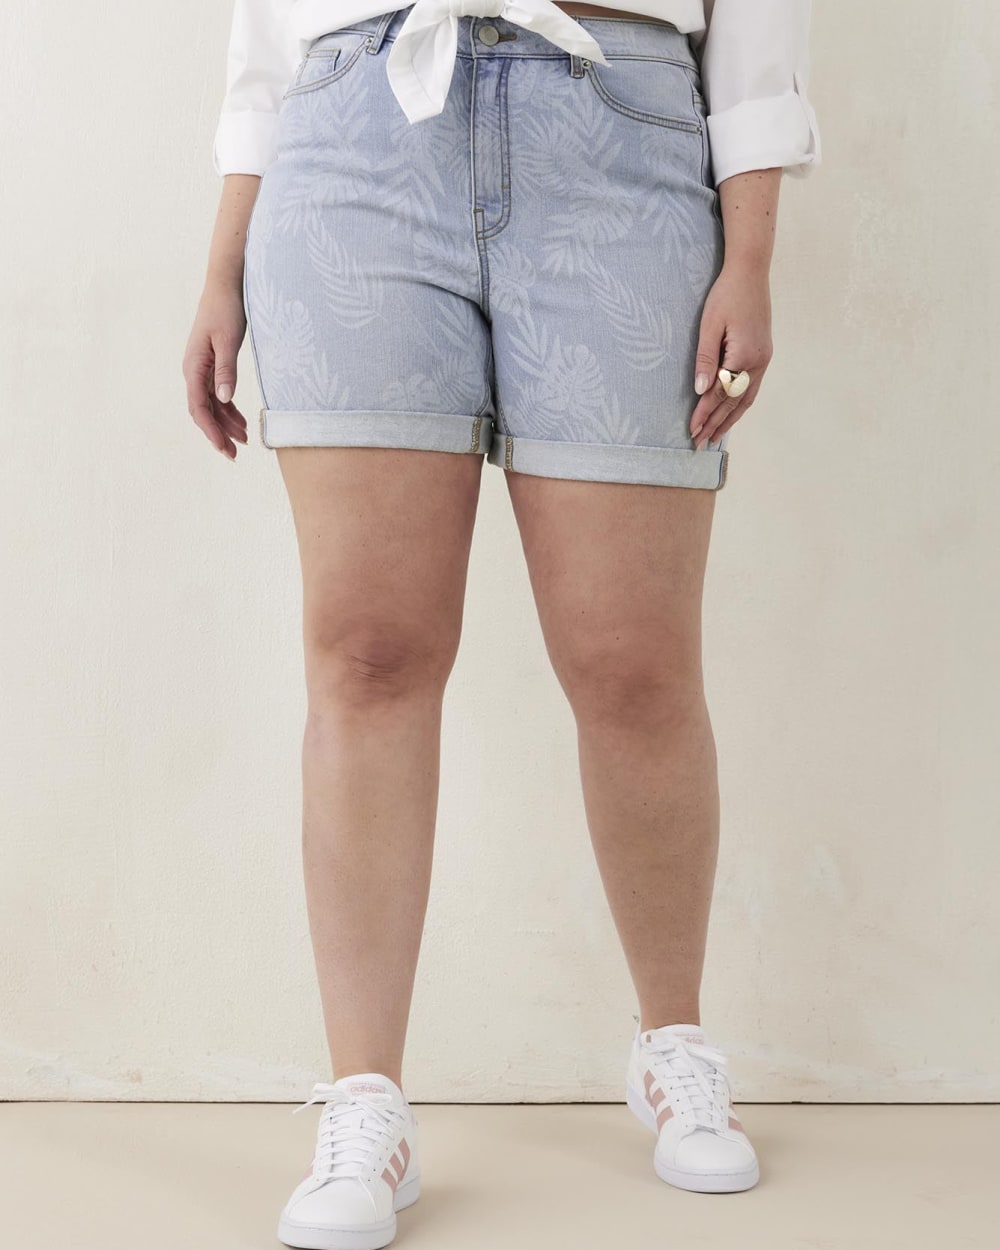 Responsible, Printed Rolled Cuff Denim Shorts, Light Wash - d/C JEANS